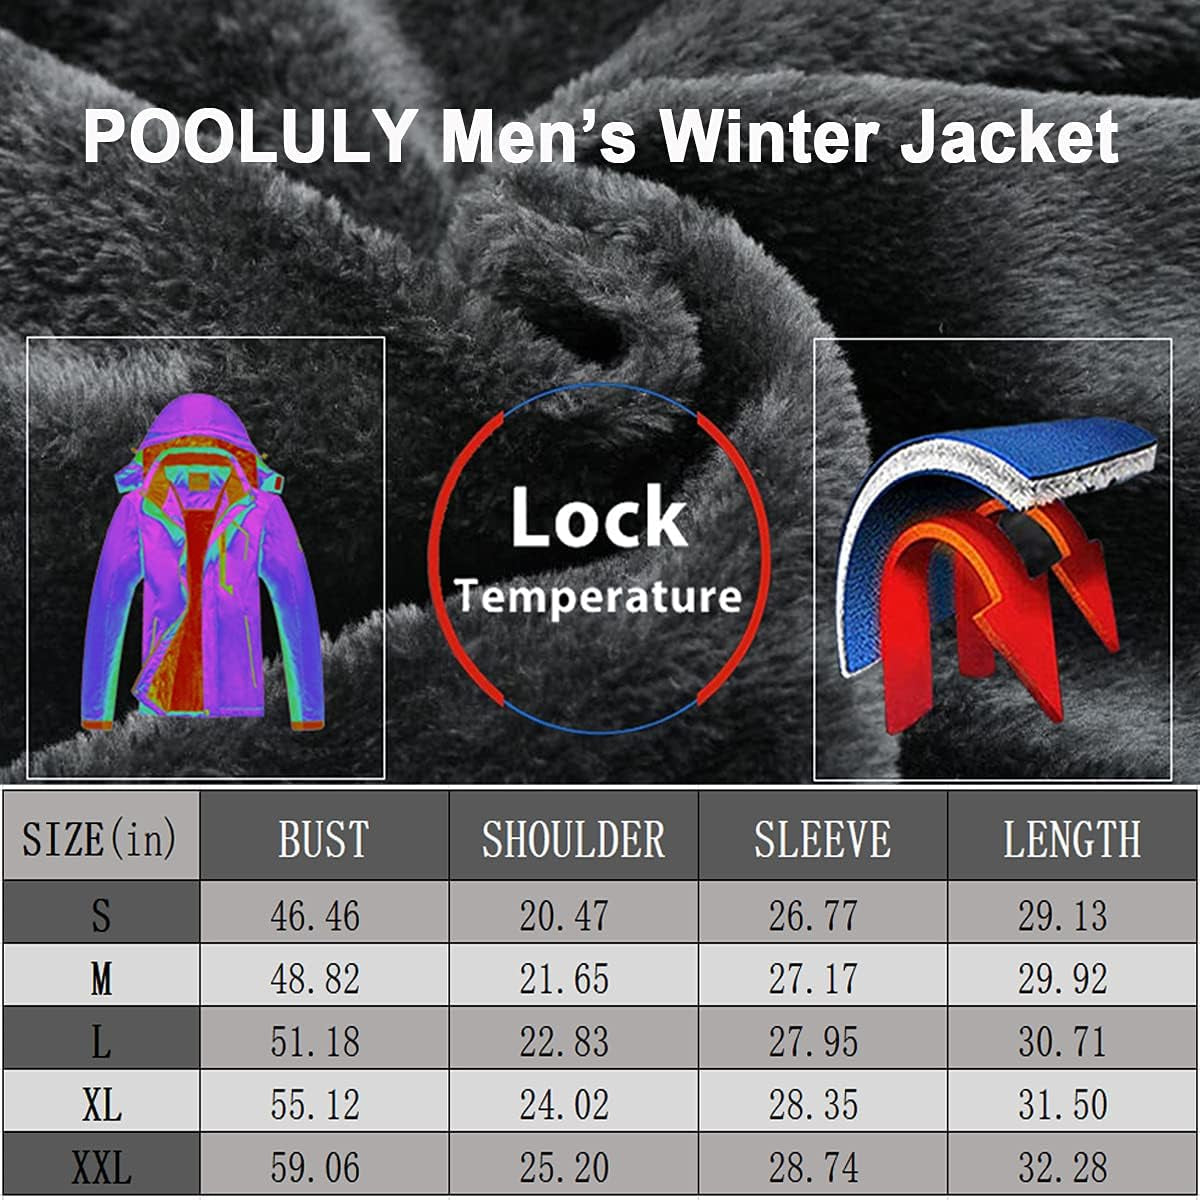 Men's Winter Ski Jacket - Waterproof Windbreaker with Hood, Ideal for Snowboarding and Rainy Conditions